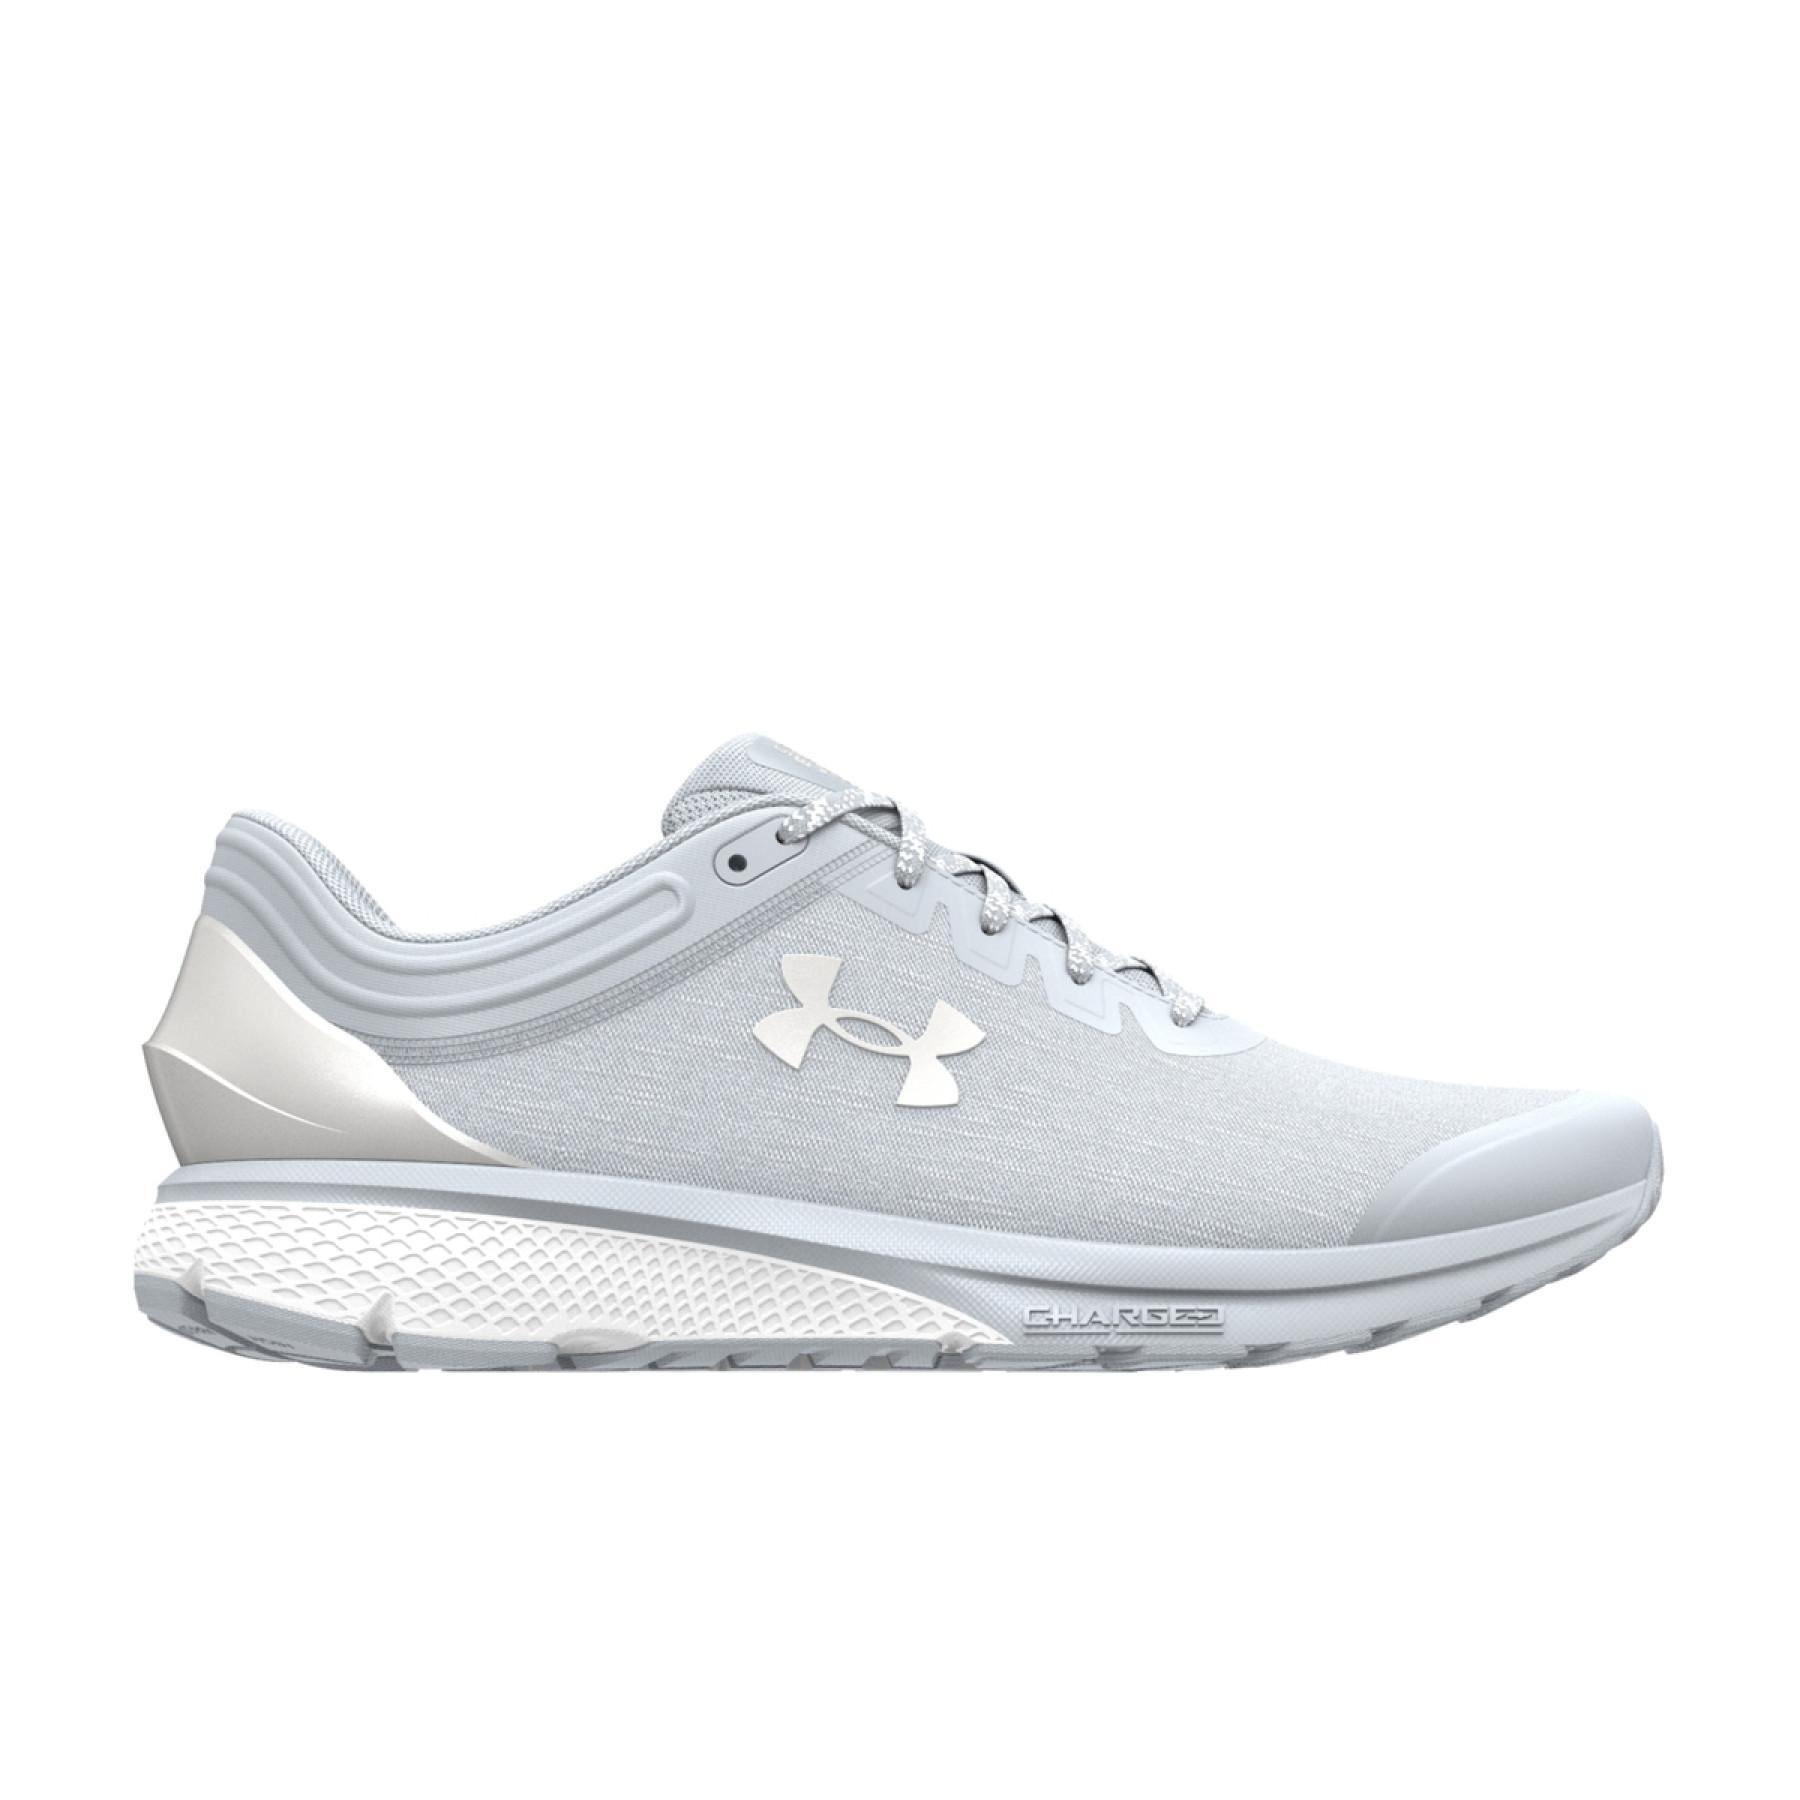 Hardloopschoenen voor dames Under Armour Charged Escape 3 EVO Charm